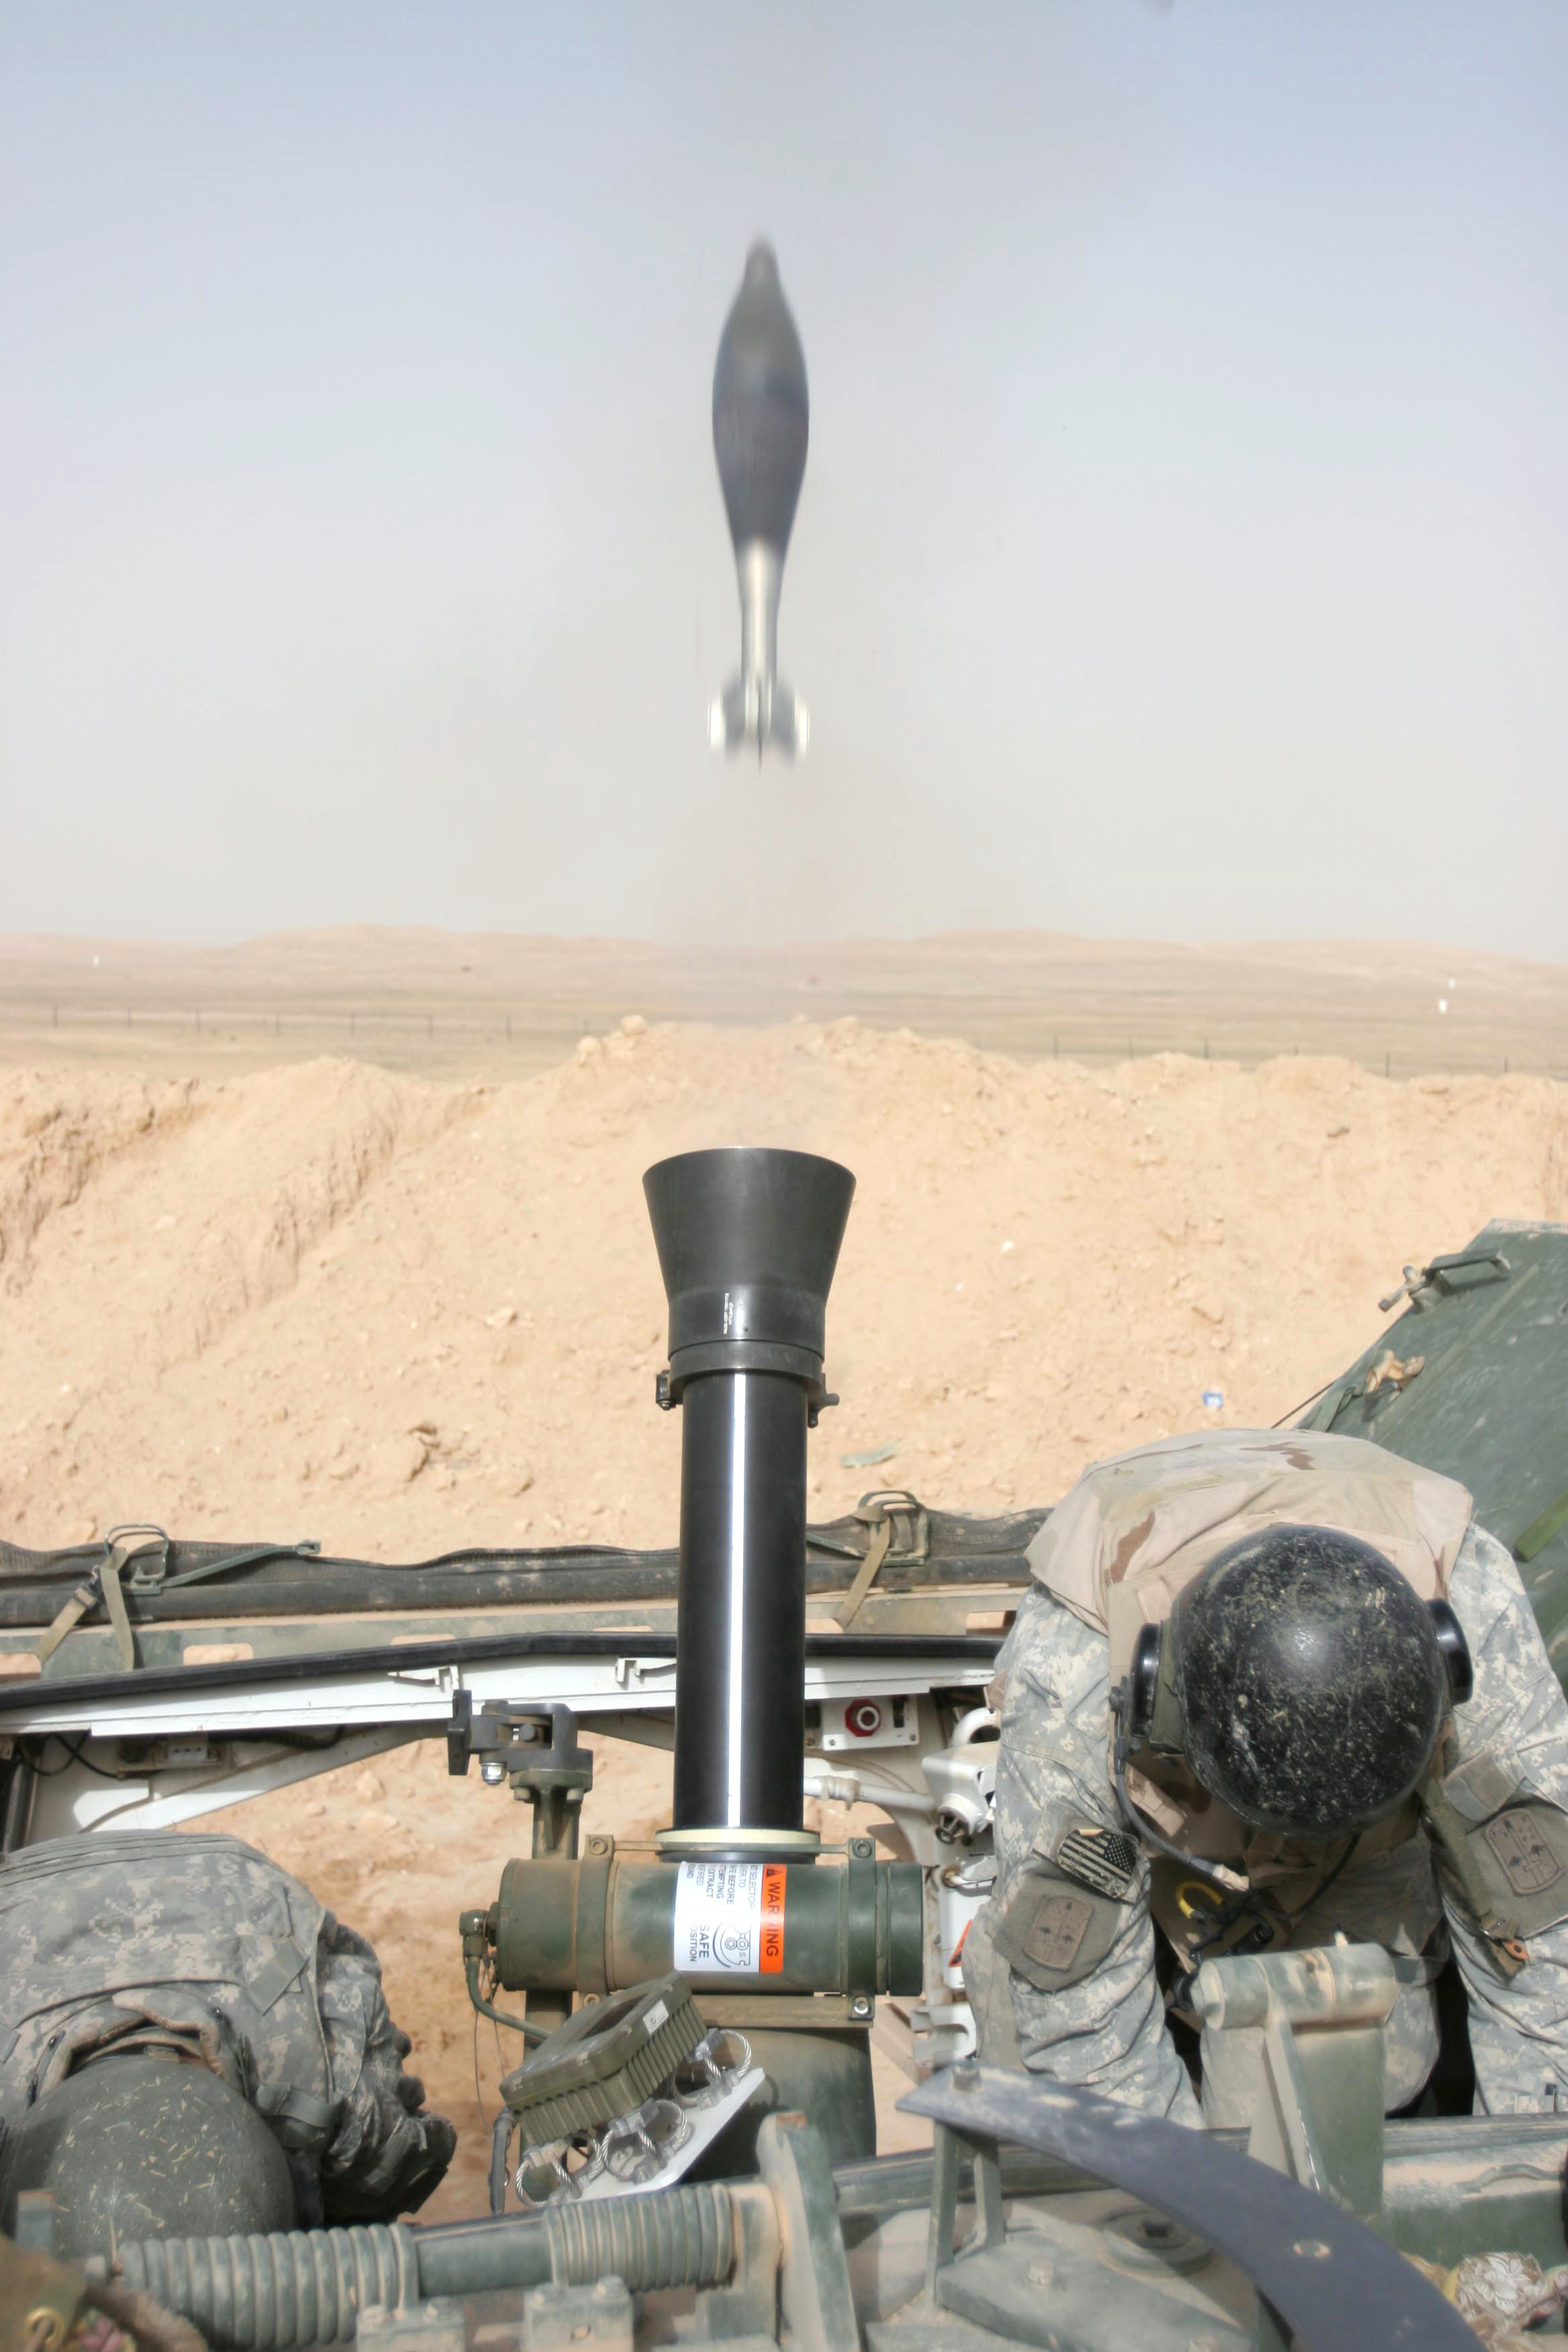 US_Navy_060309-M-0036Y-012_A_mortar_is_fired_from_a_Stryker_vehicle,_assigned_to_which_to_the_4th_Squadron,_14th_Cavalry_Regiment,_during_a_test_firing_at_the_Combat_Out_Post_Rawah,_in_the_Al_Anbar_Province.jpg